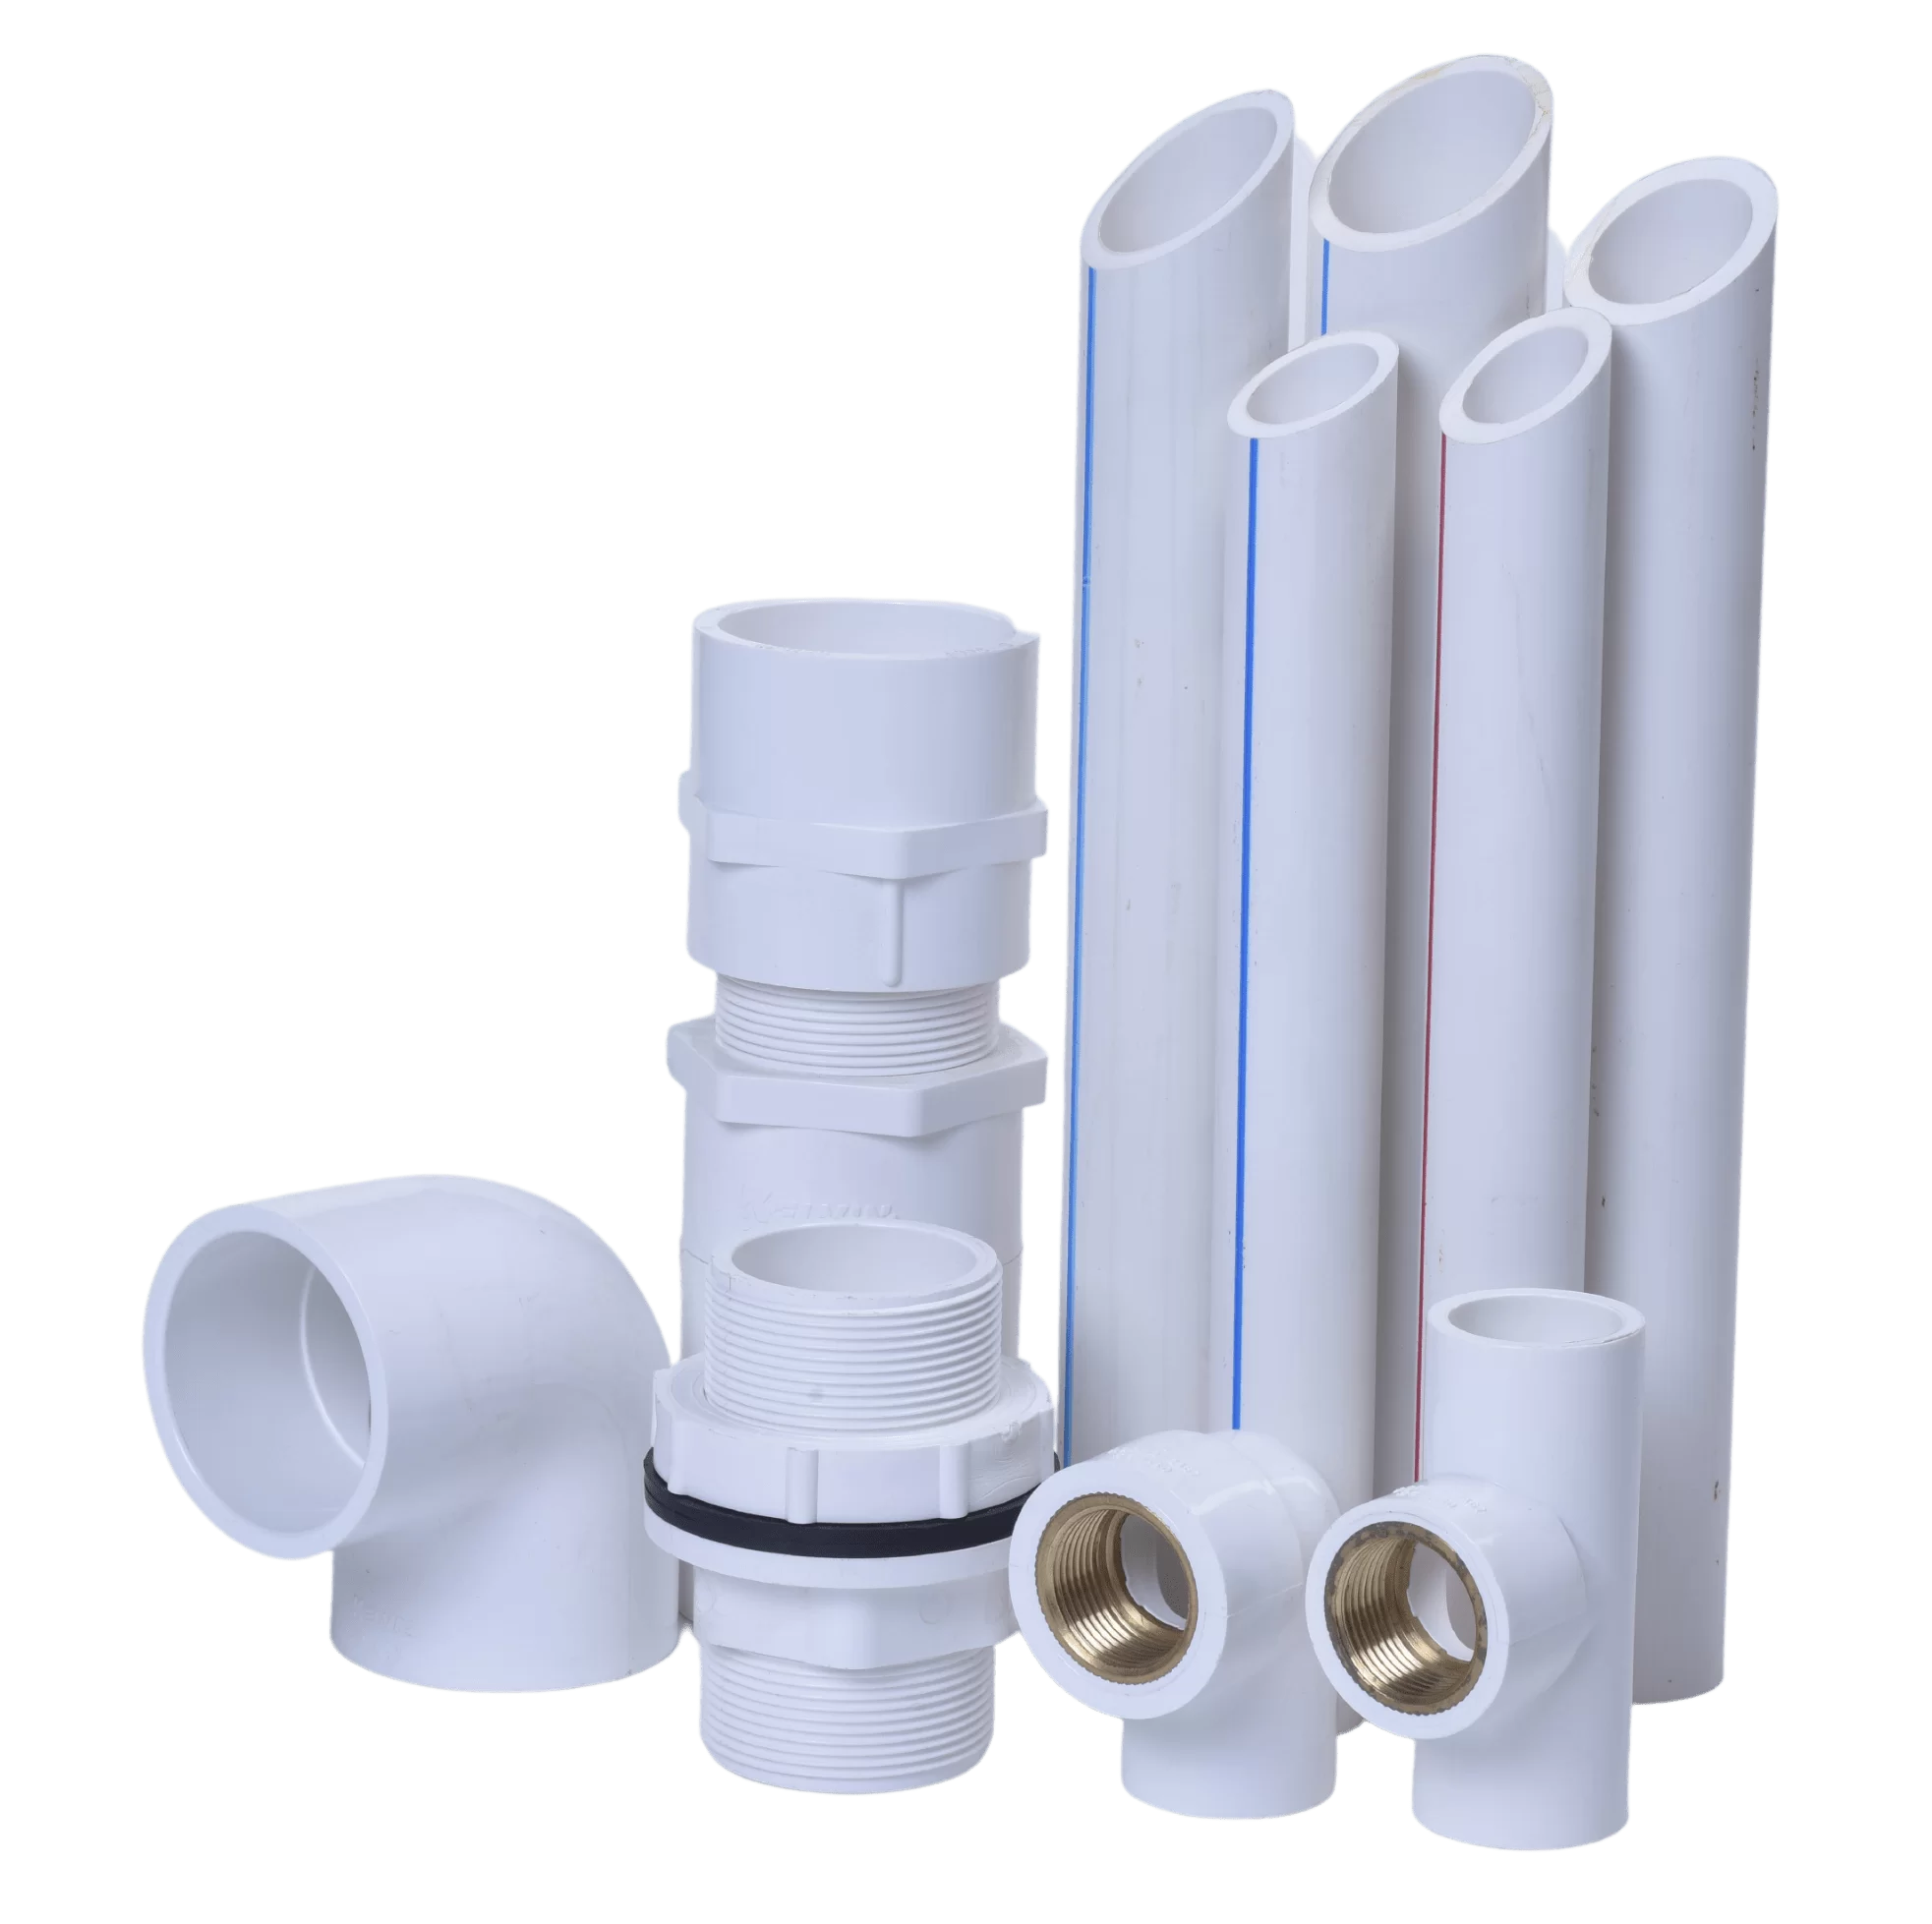 uPVC pipes and fittings